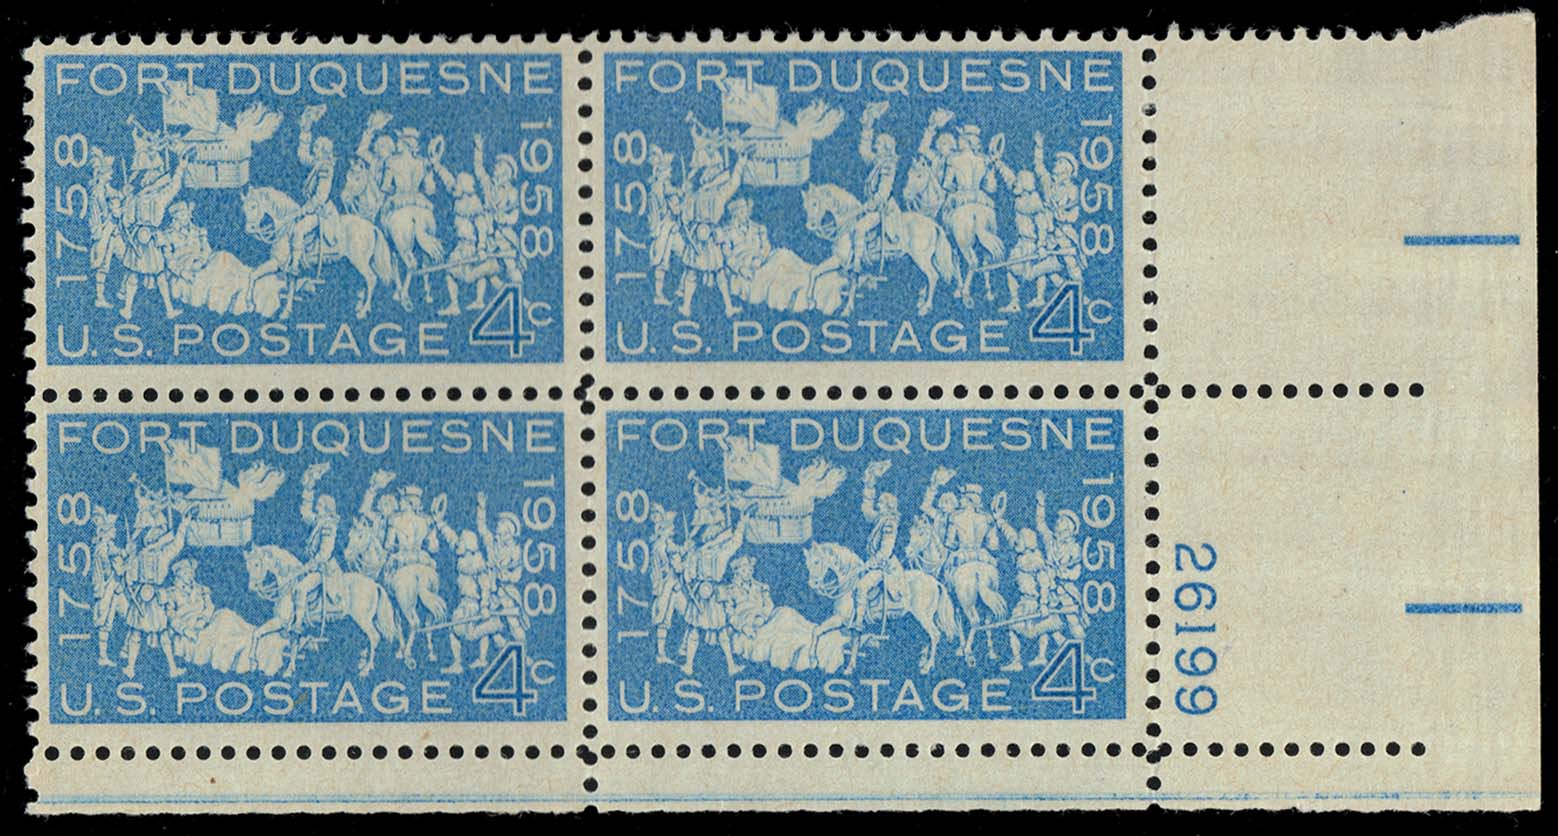 US #1123 Fort Duquesne P# Block of 4; MNH - Click Image to Close